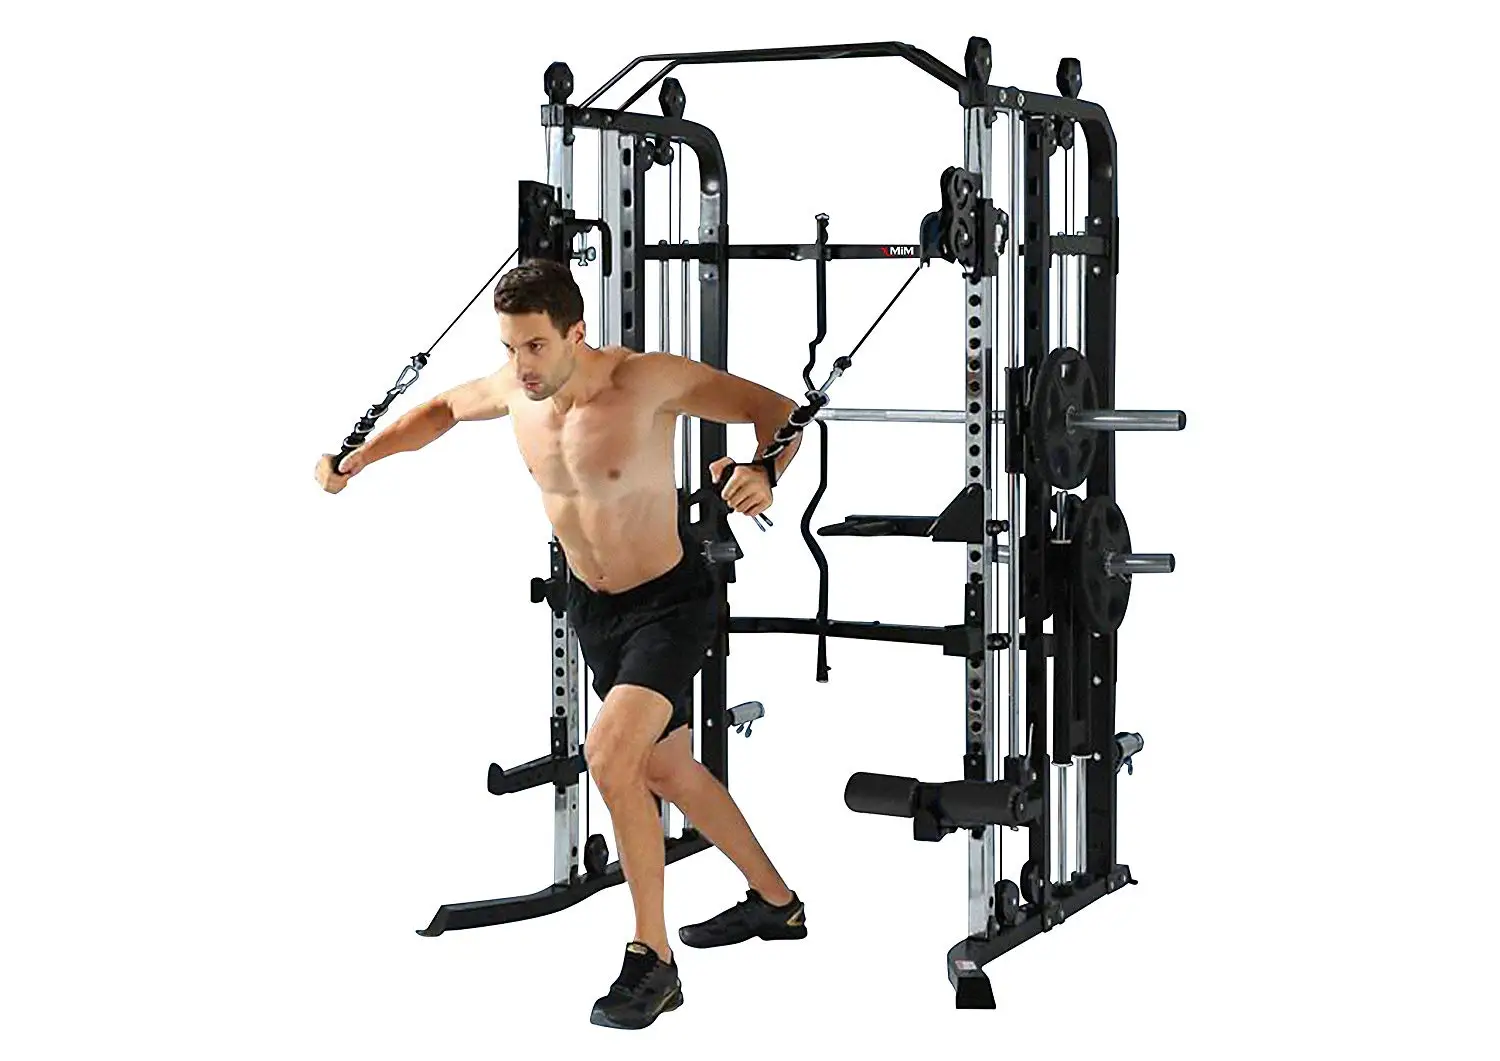 fitness gear ultimate smith functional trainer